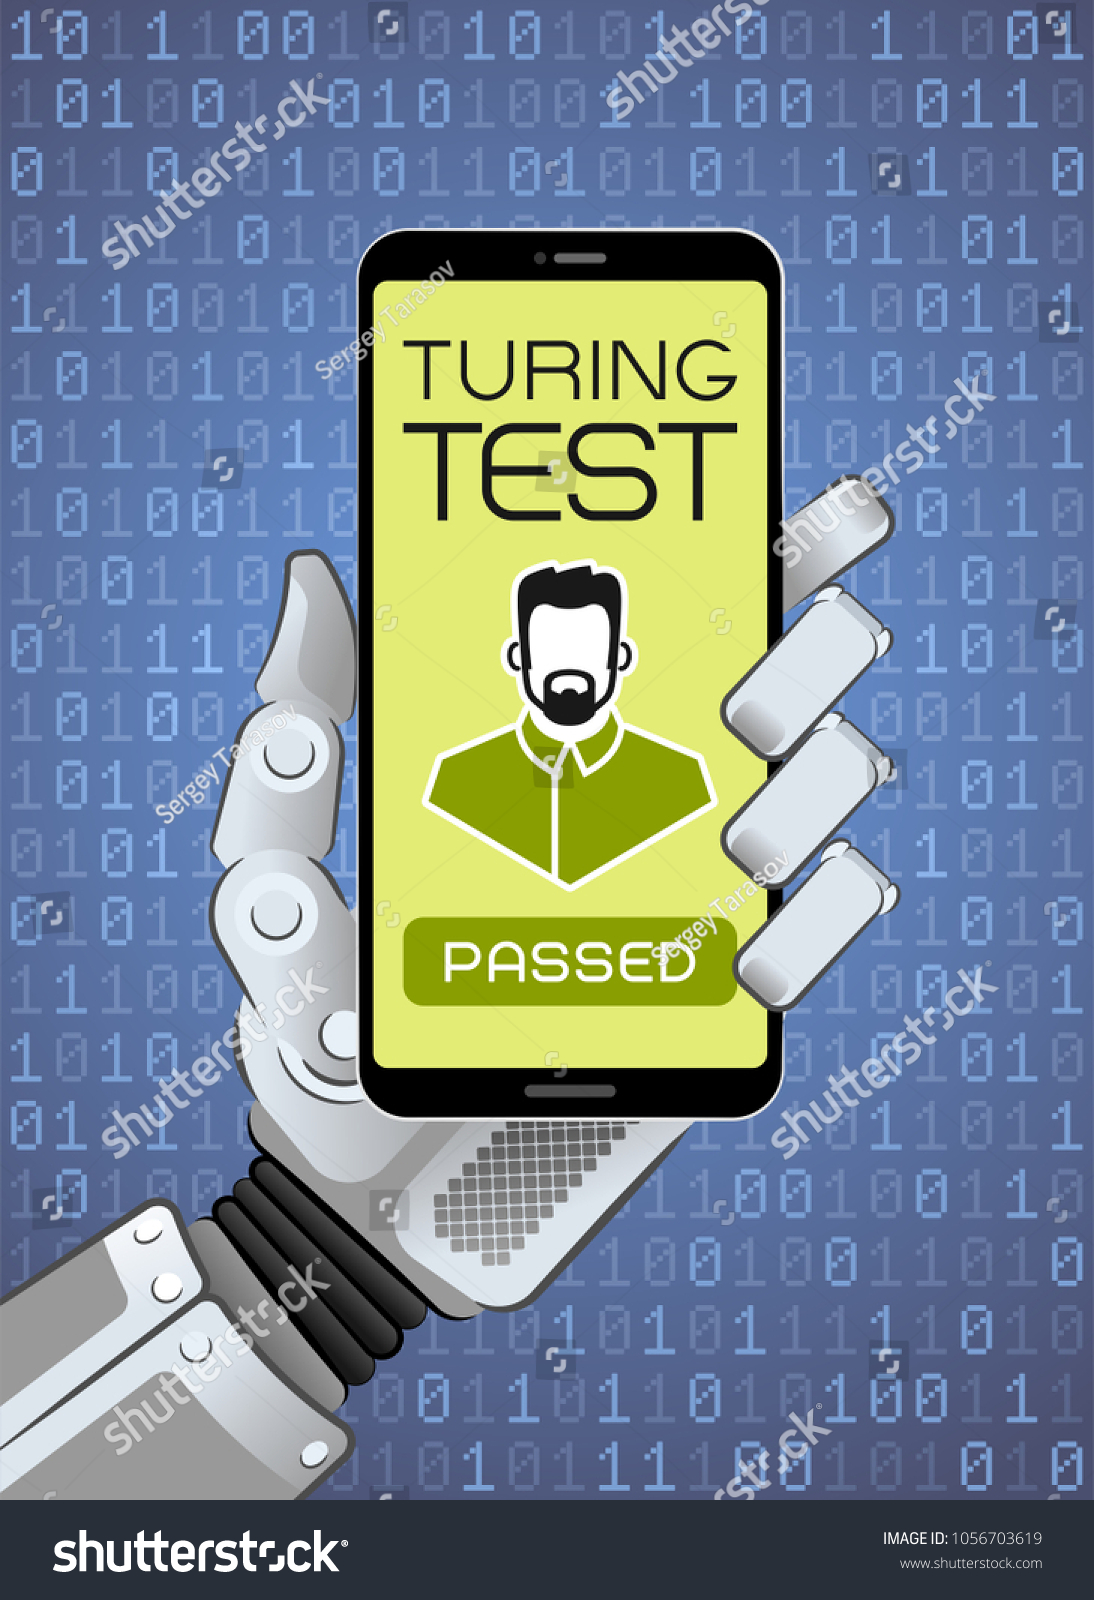 SVG of The Turing Test Has Been Successfully Passed By A Robot. Mechanical hand of a robot holding smartphone showing test result. Vector illustration on the subject of 'Artificial Intelligence'. svg